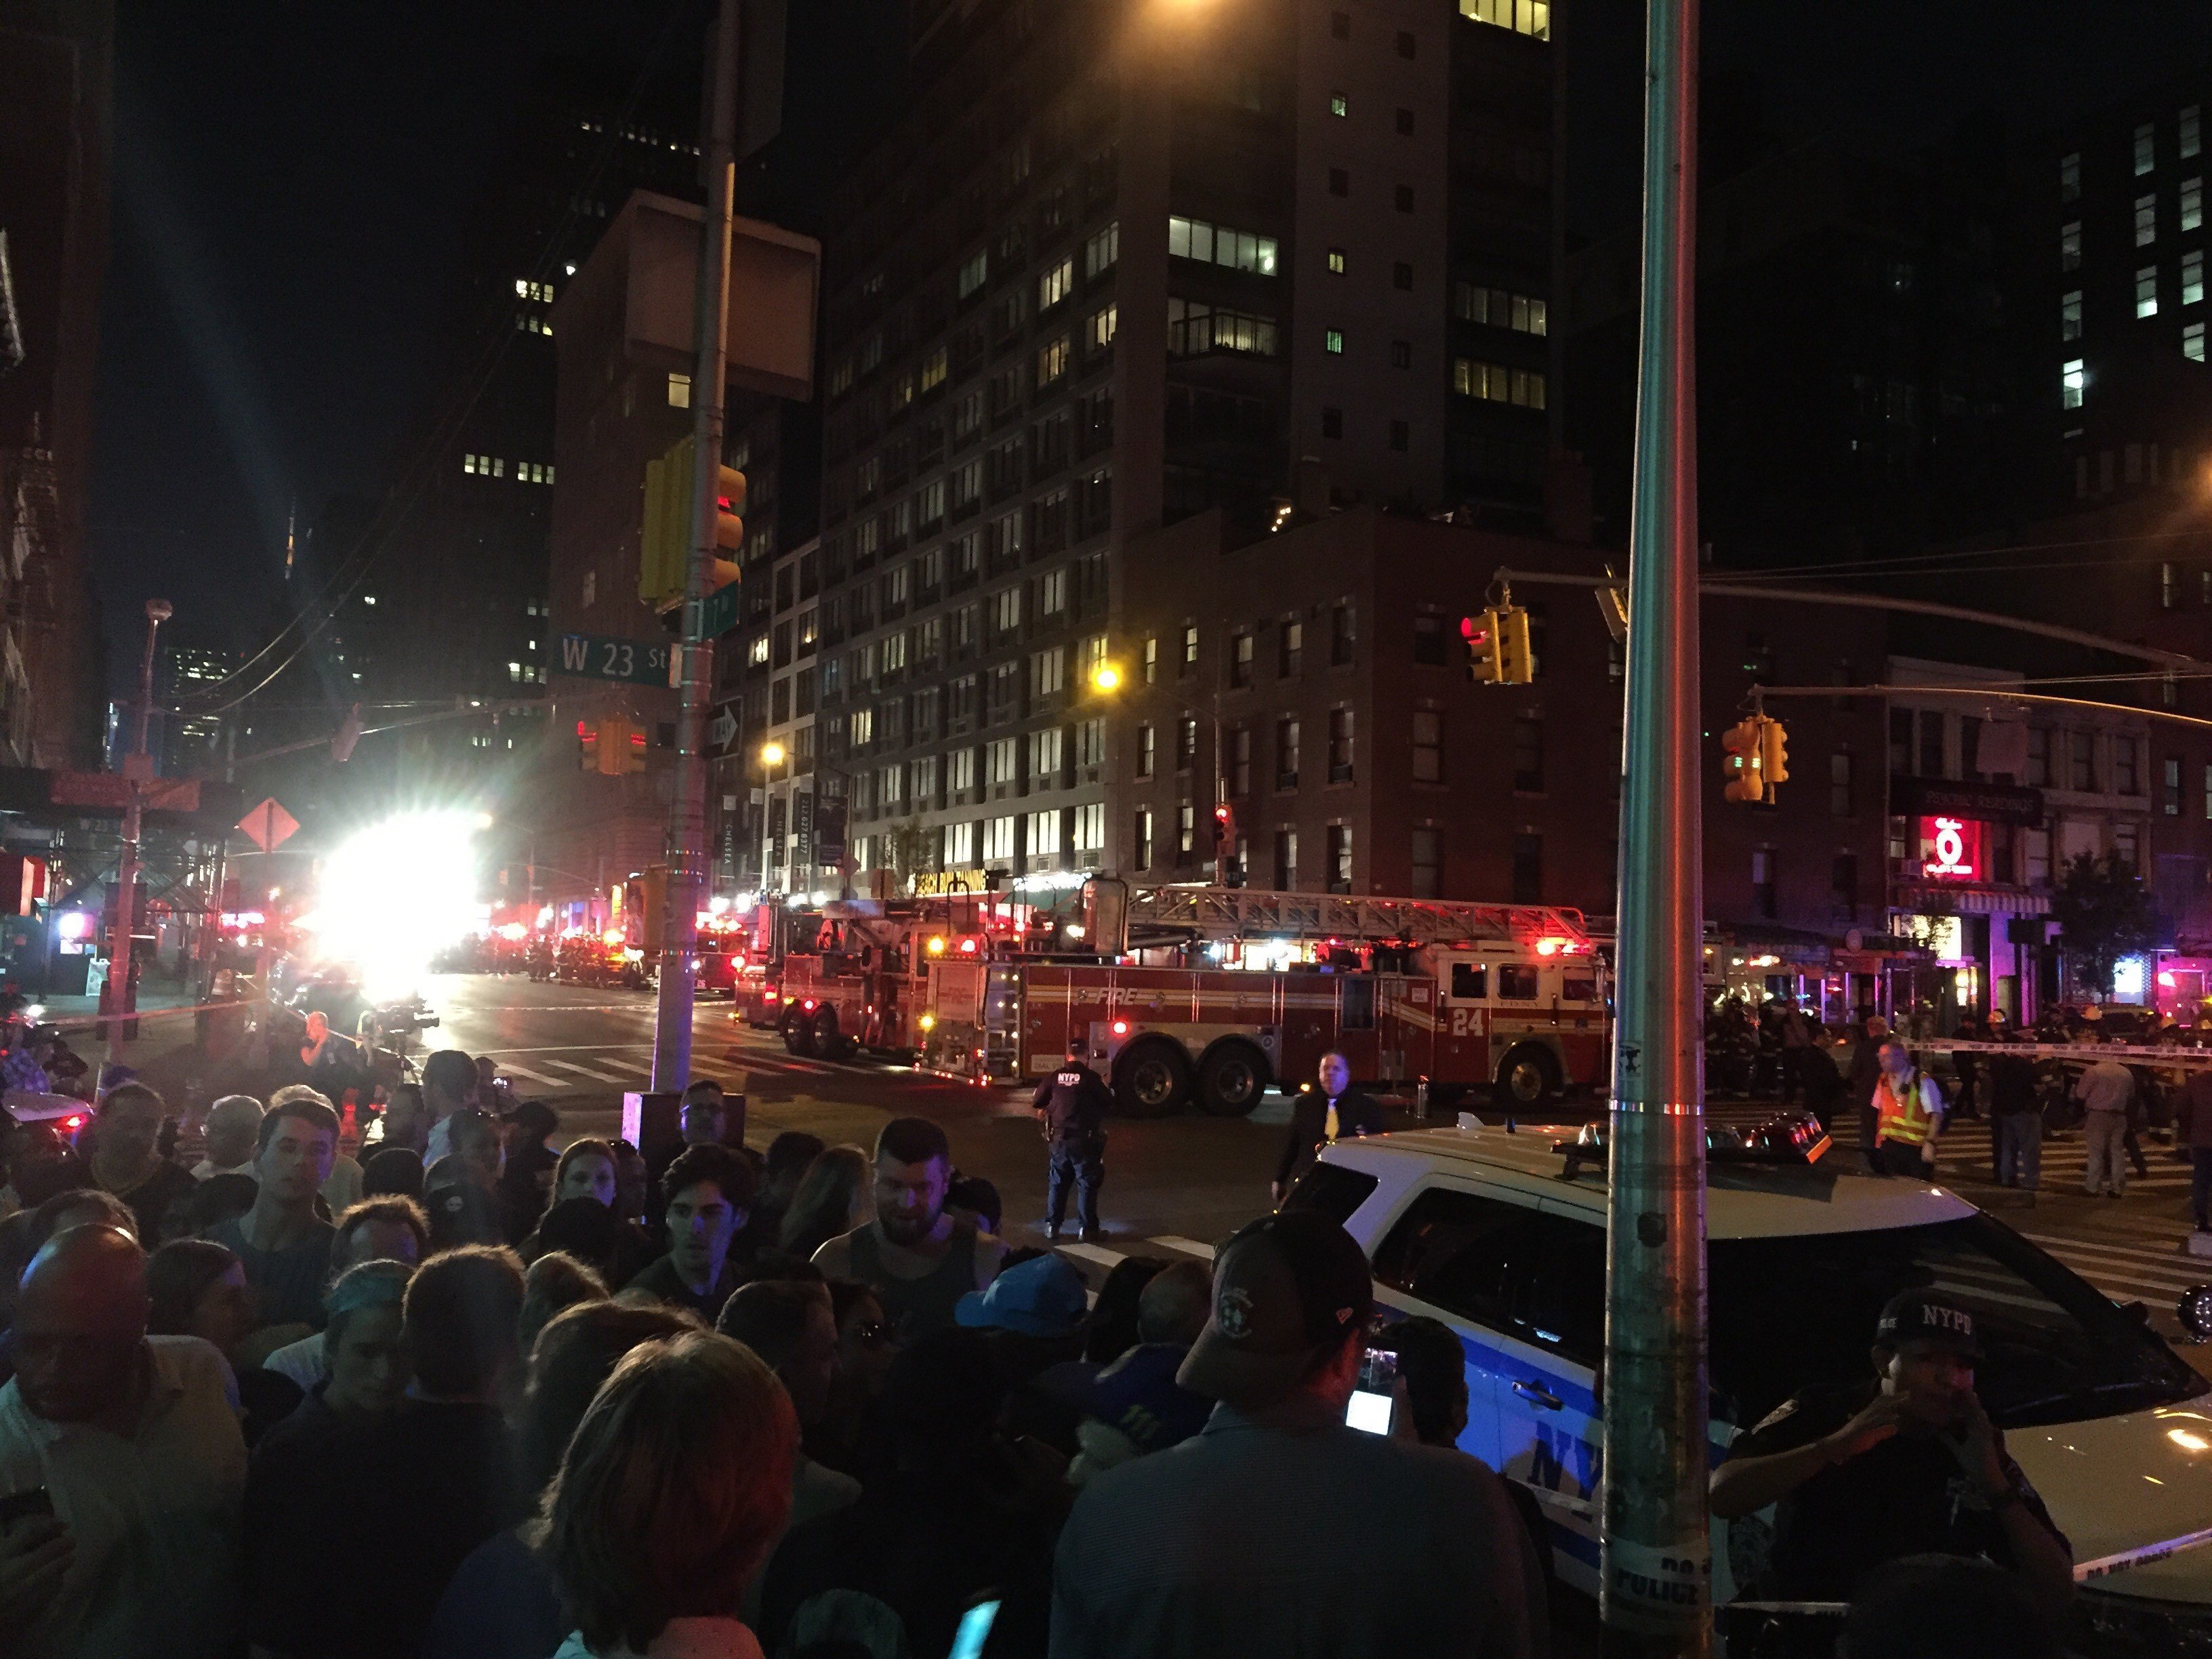 An explosion in the Chelsea neighborhood of New York on Saturday, September 17, 2016